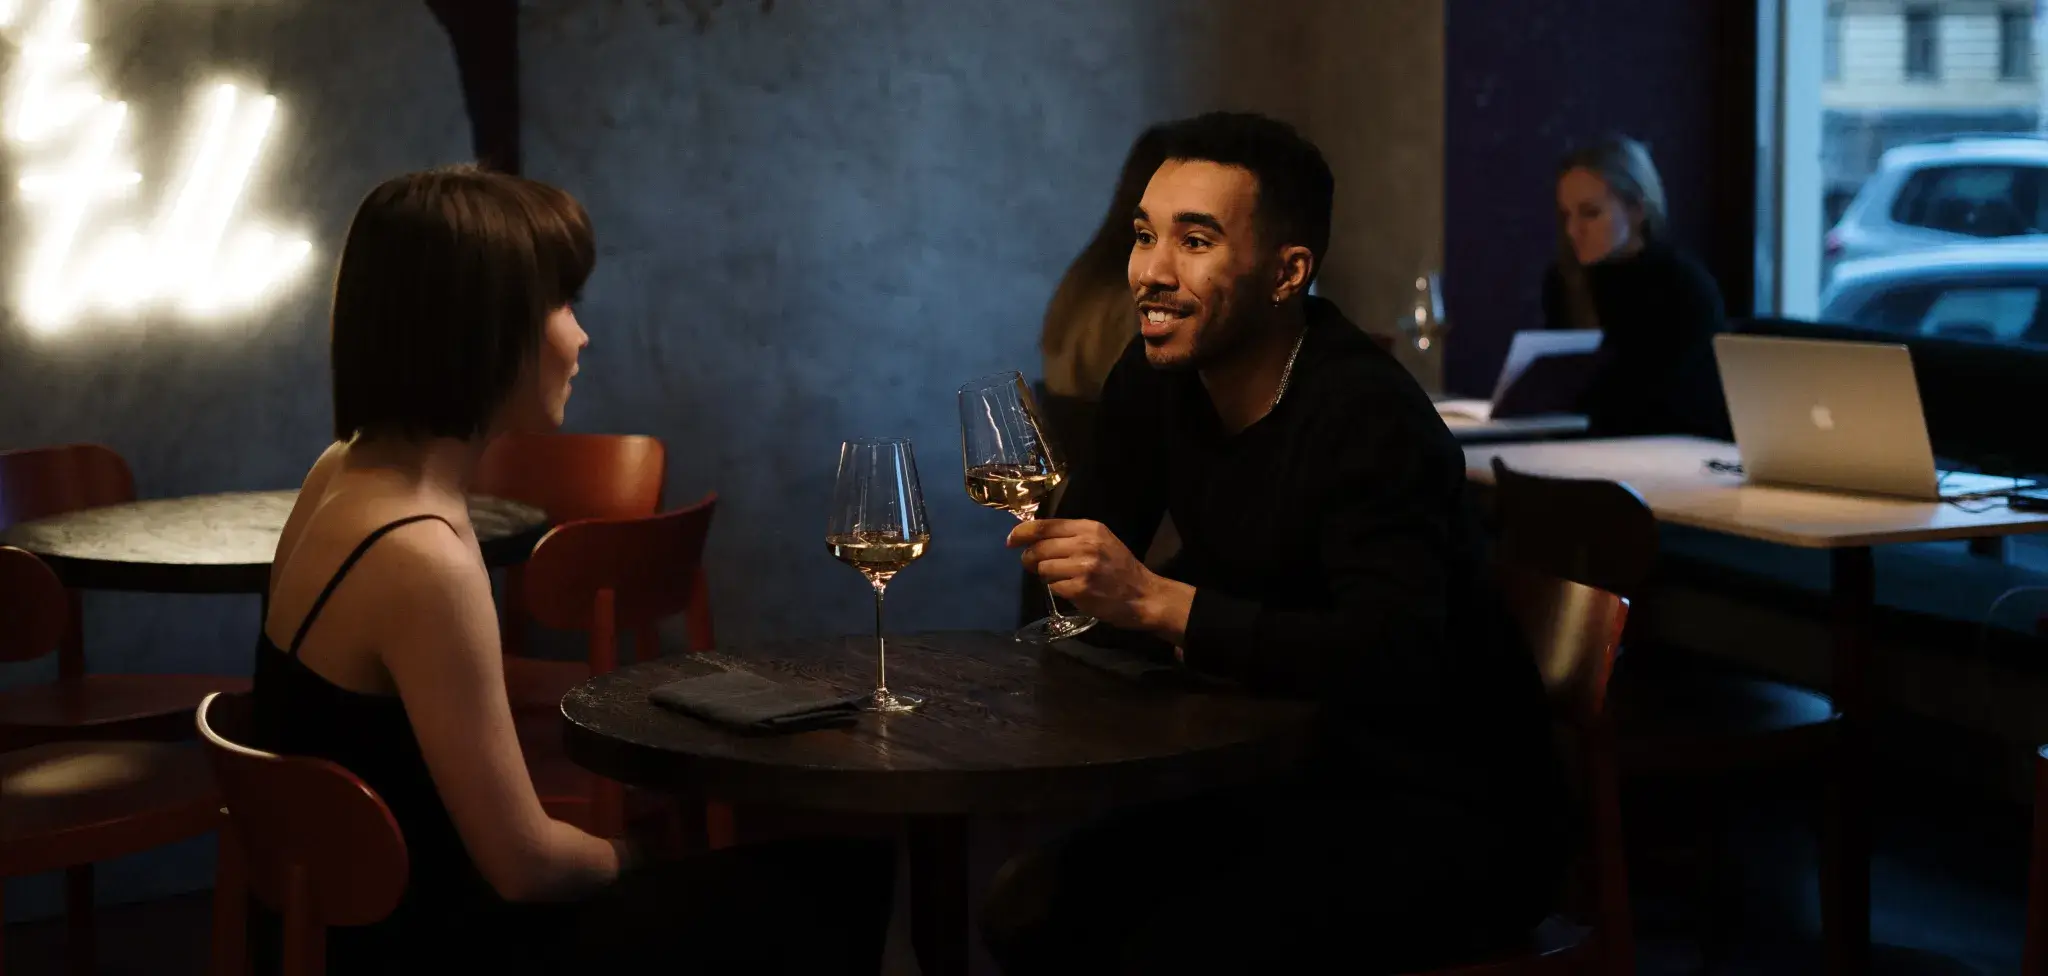 couple drinking wine at dimly lit table